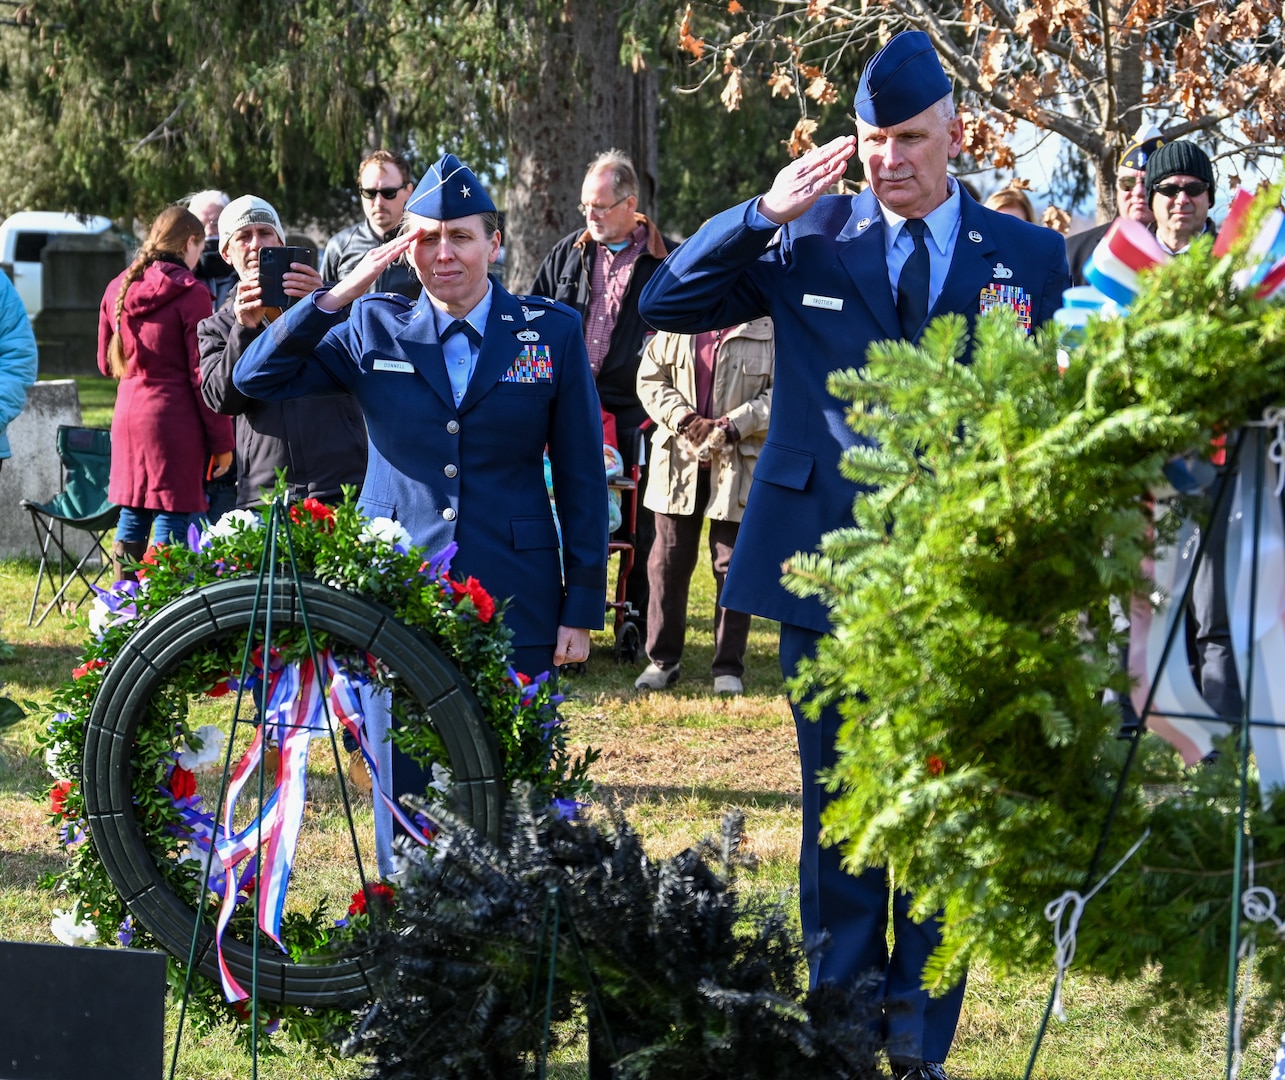 Brig. General Denise Donnell, the commander of the New York Air National Guard, and Command Chief Master Sgt. Jeffery Trottier salute after placing a wreath from President Joseph Biden at the grave of former President Martin Van Buren in Kinderhook, New York, on the 240th anniversary of his birth Dec. 5, 1782. Since 1967, military officers have presented a wreath from the current president at the gravesite of previous presidents on the anniversary of their birth.